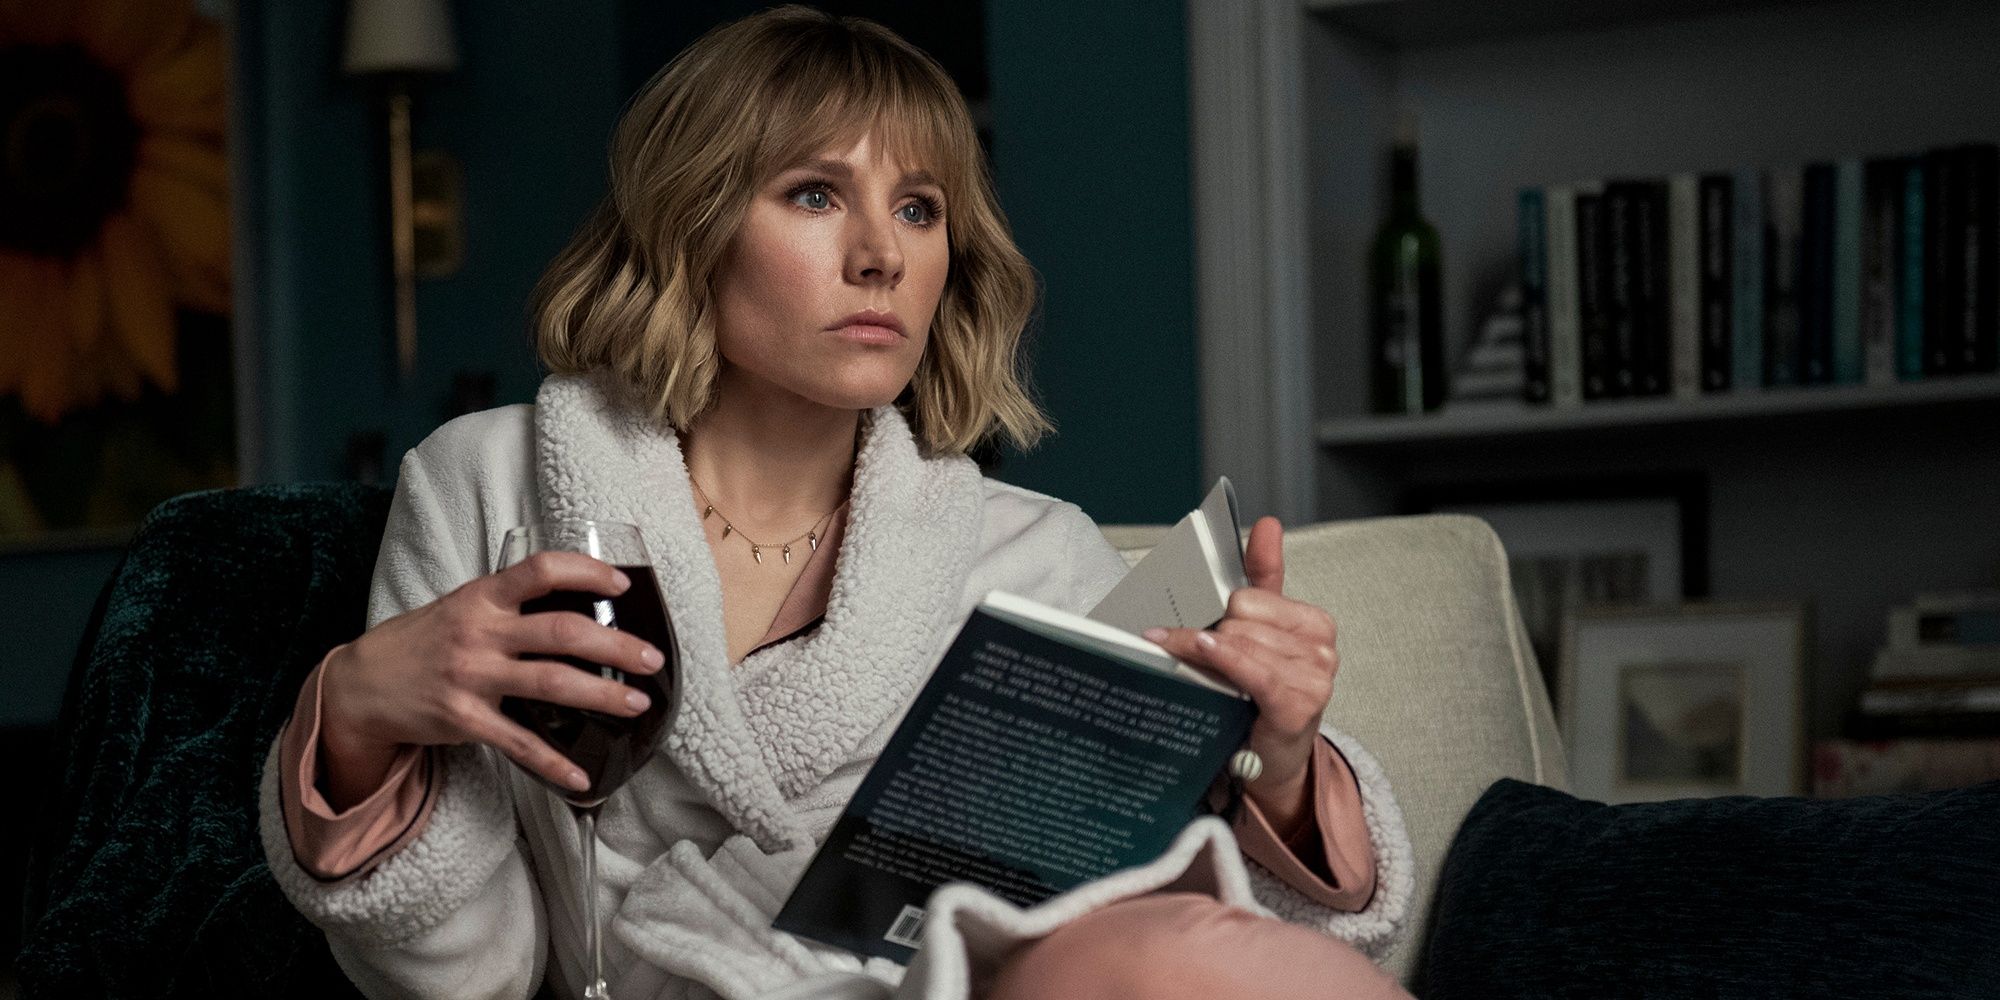 Emma staring intently at something while she holds a glass of wine and a book